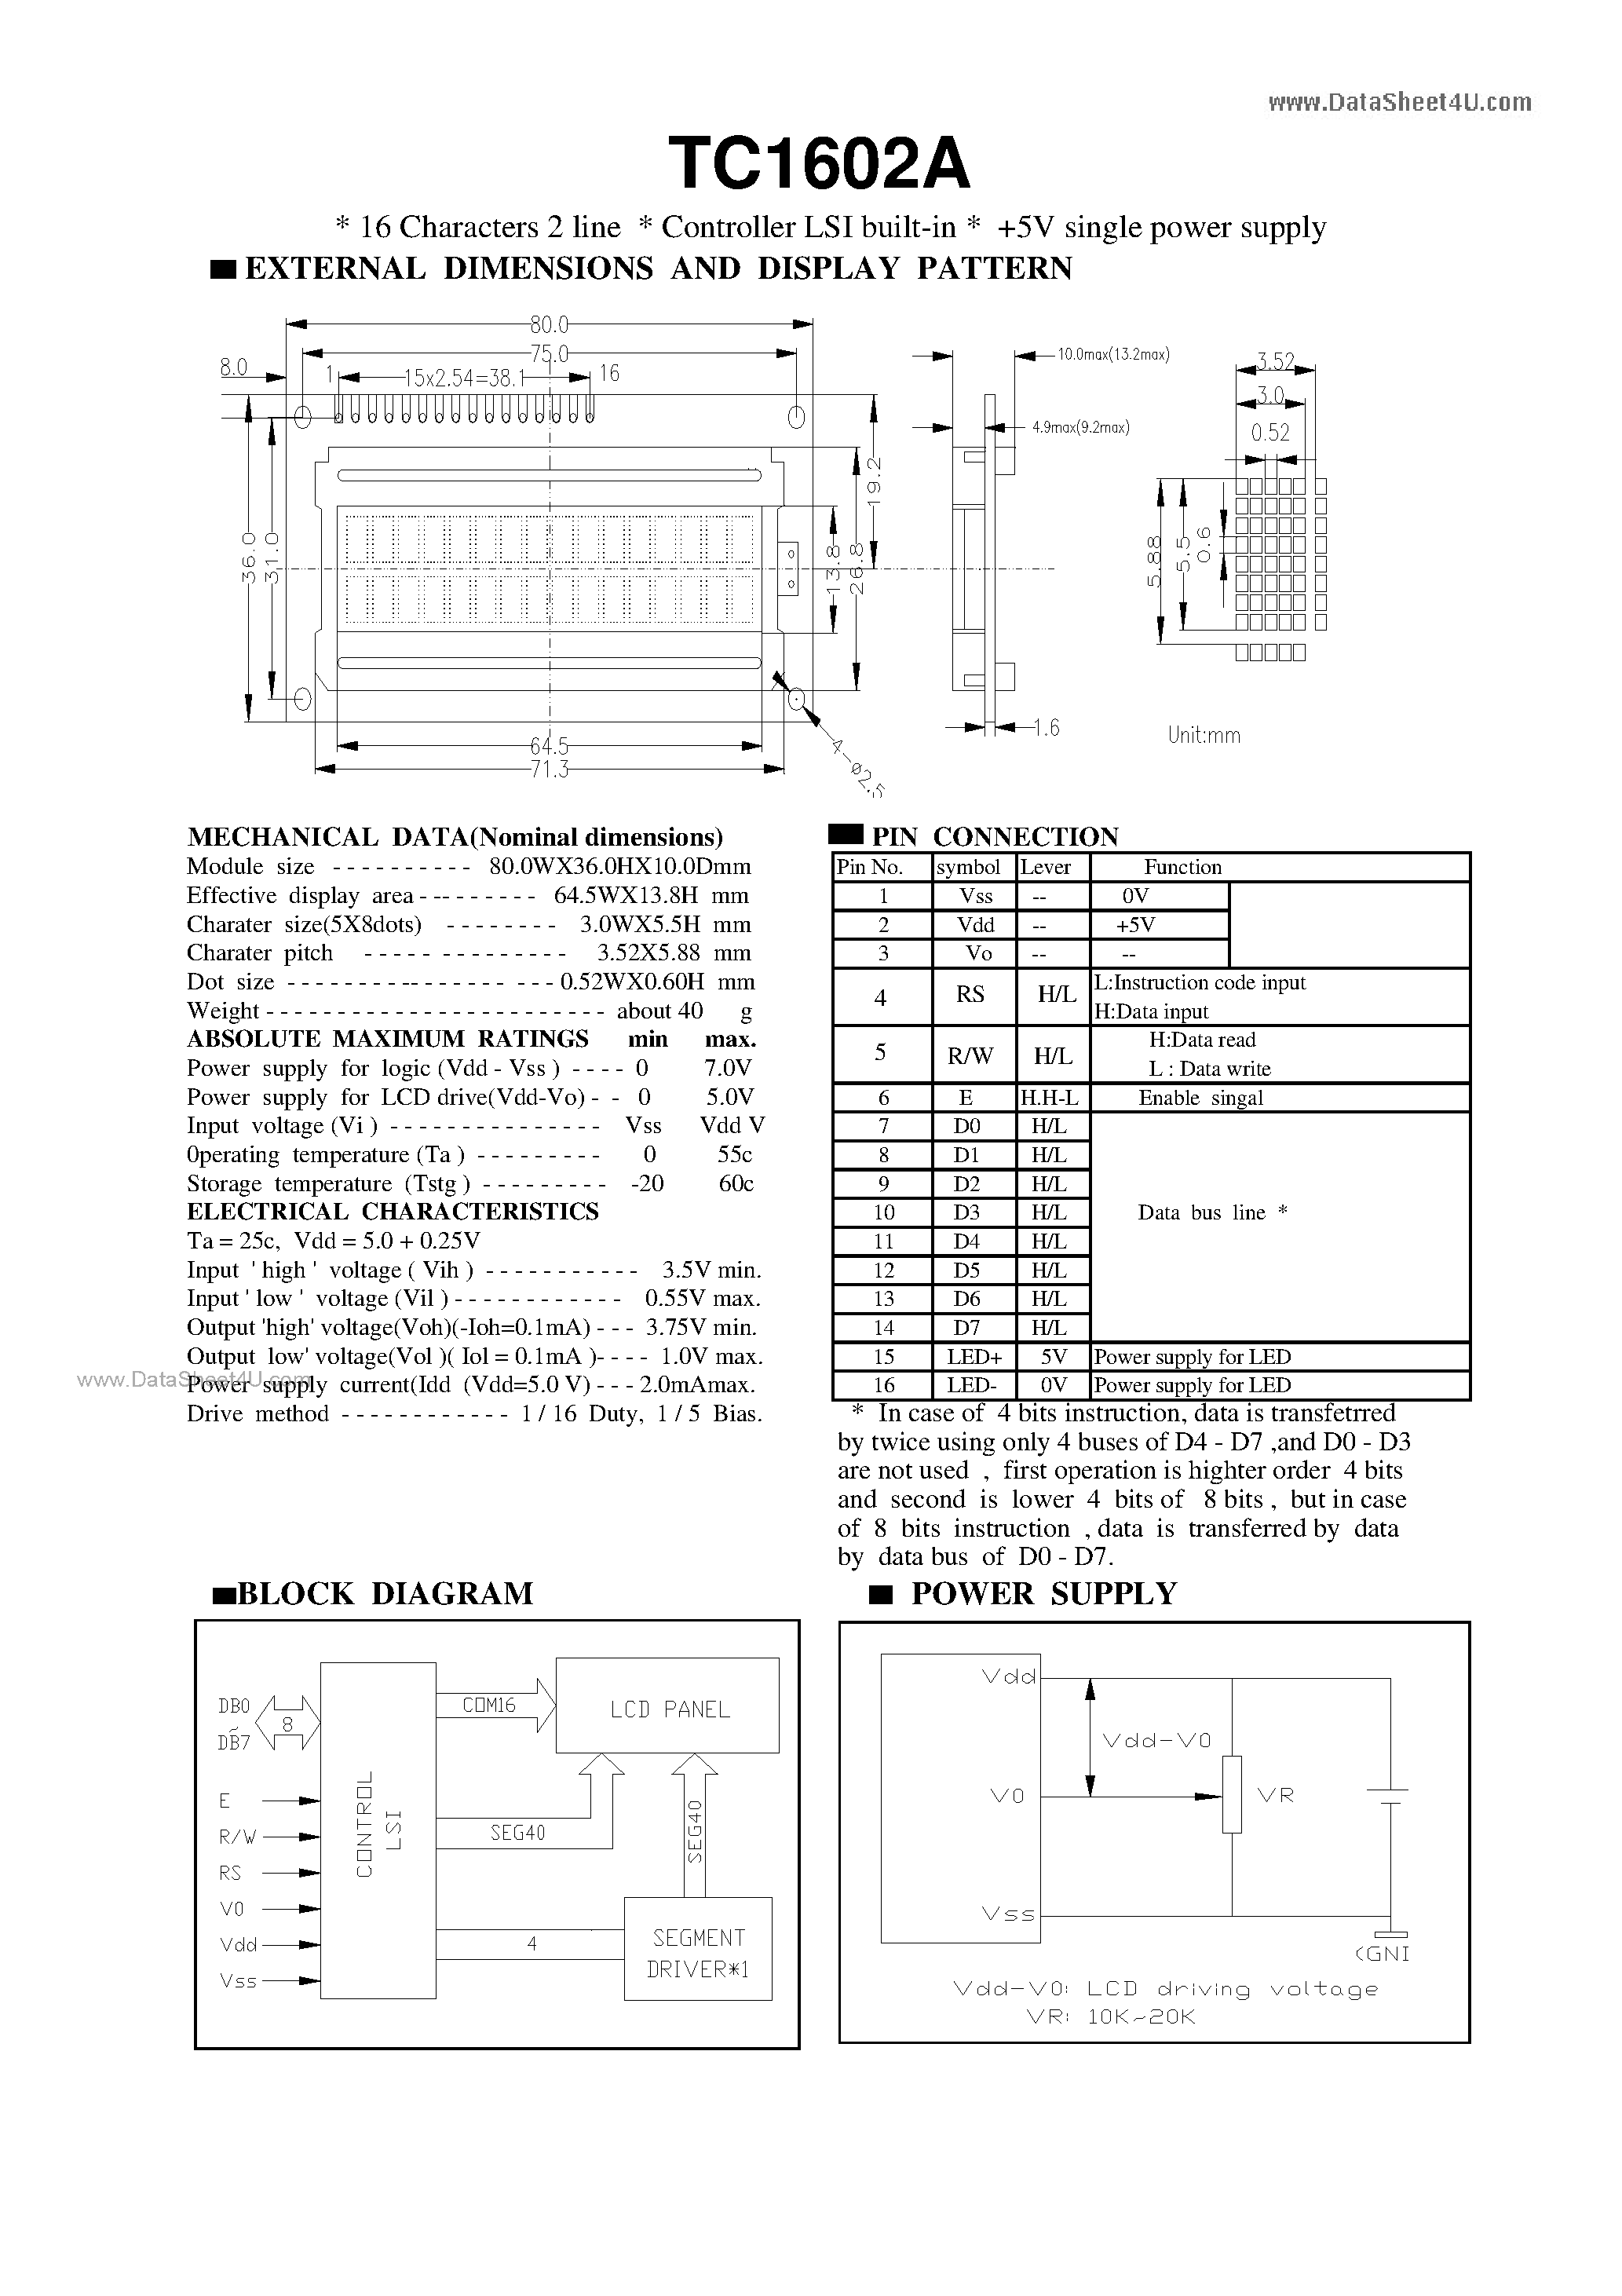 Datasheet TC1602A - 16 Characters 2 line page 1